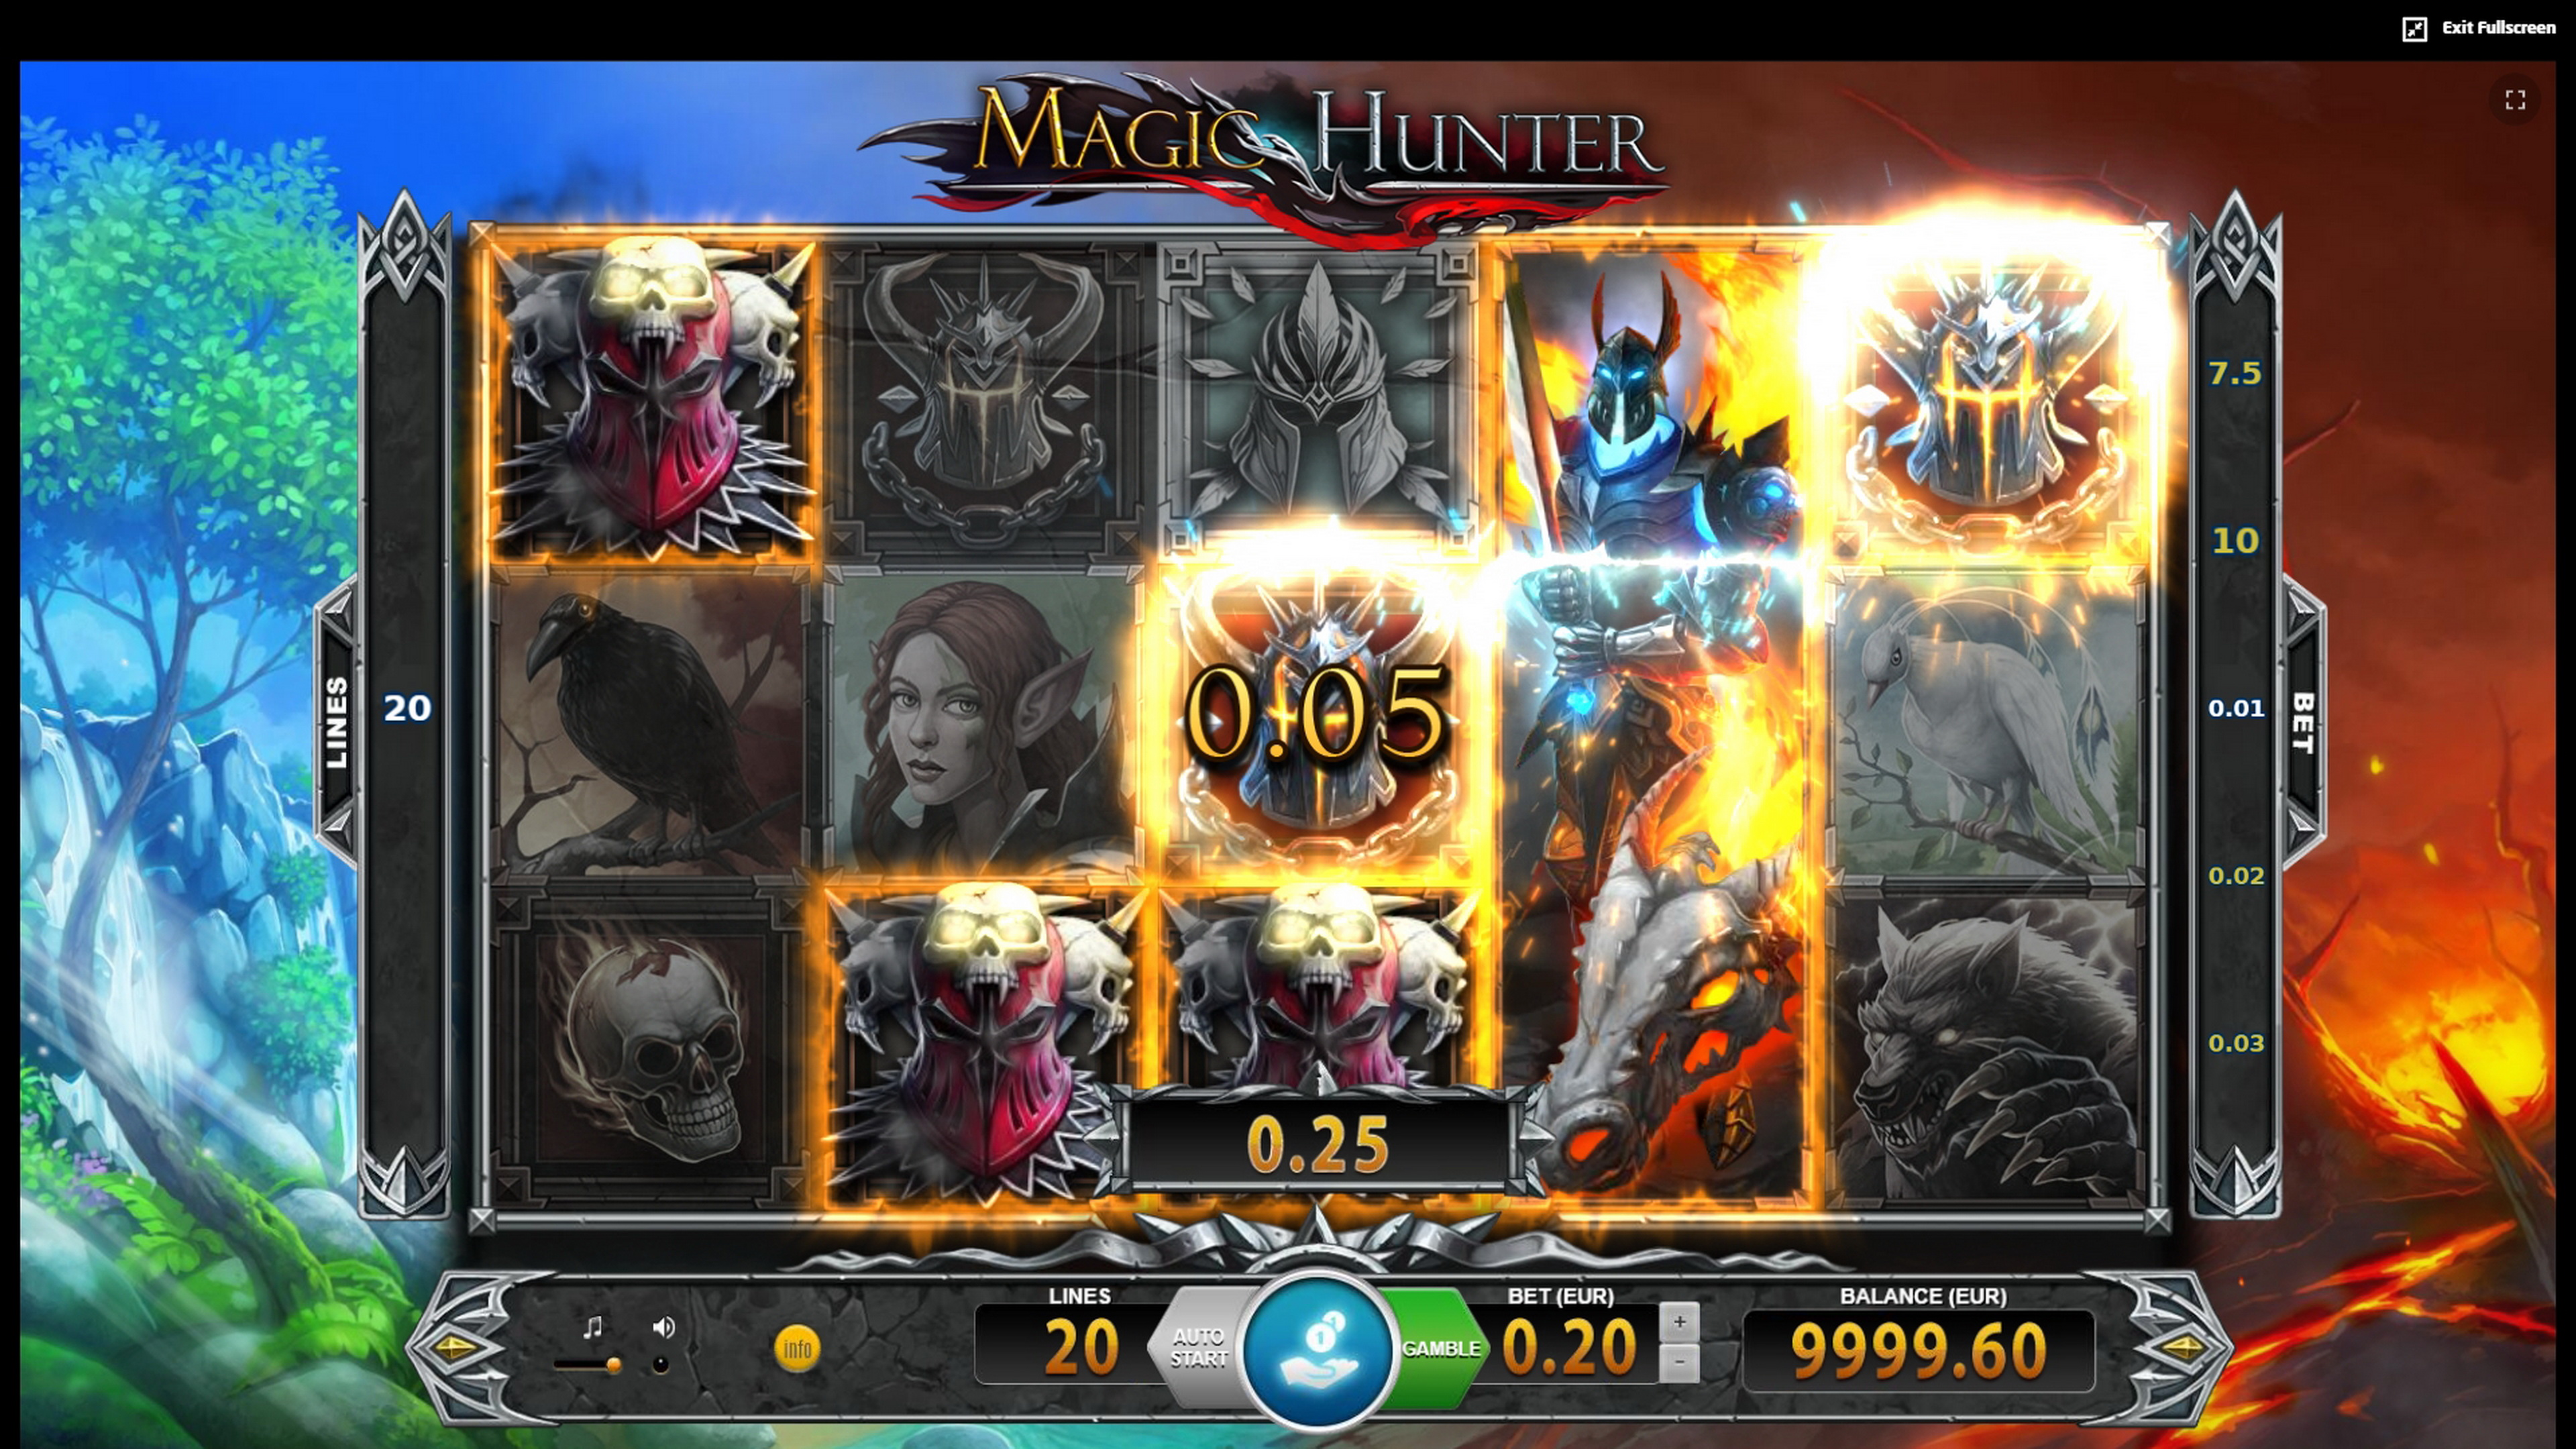 Win Money in Magic Hunter Free Slot Game by BF Games